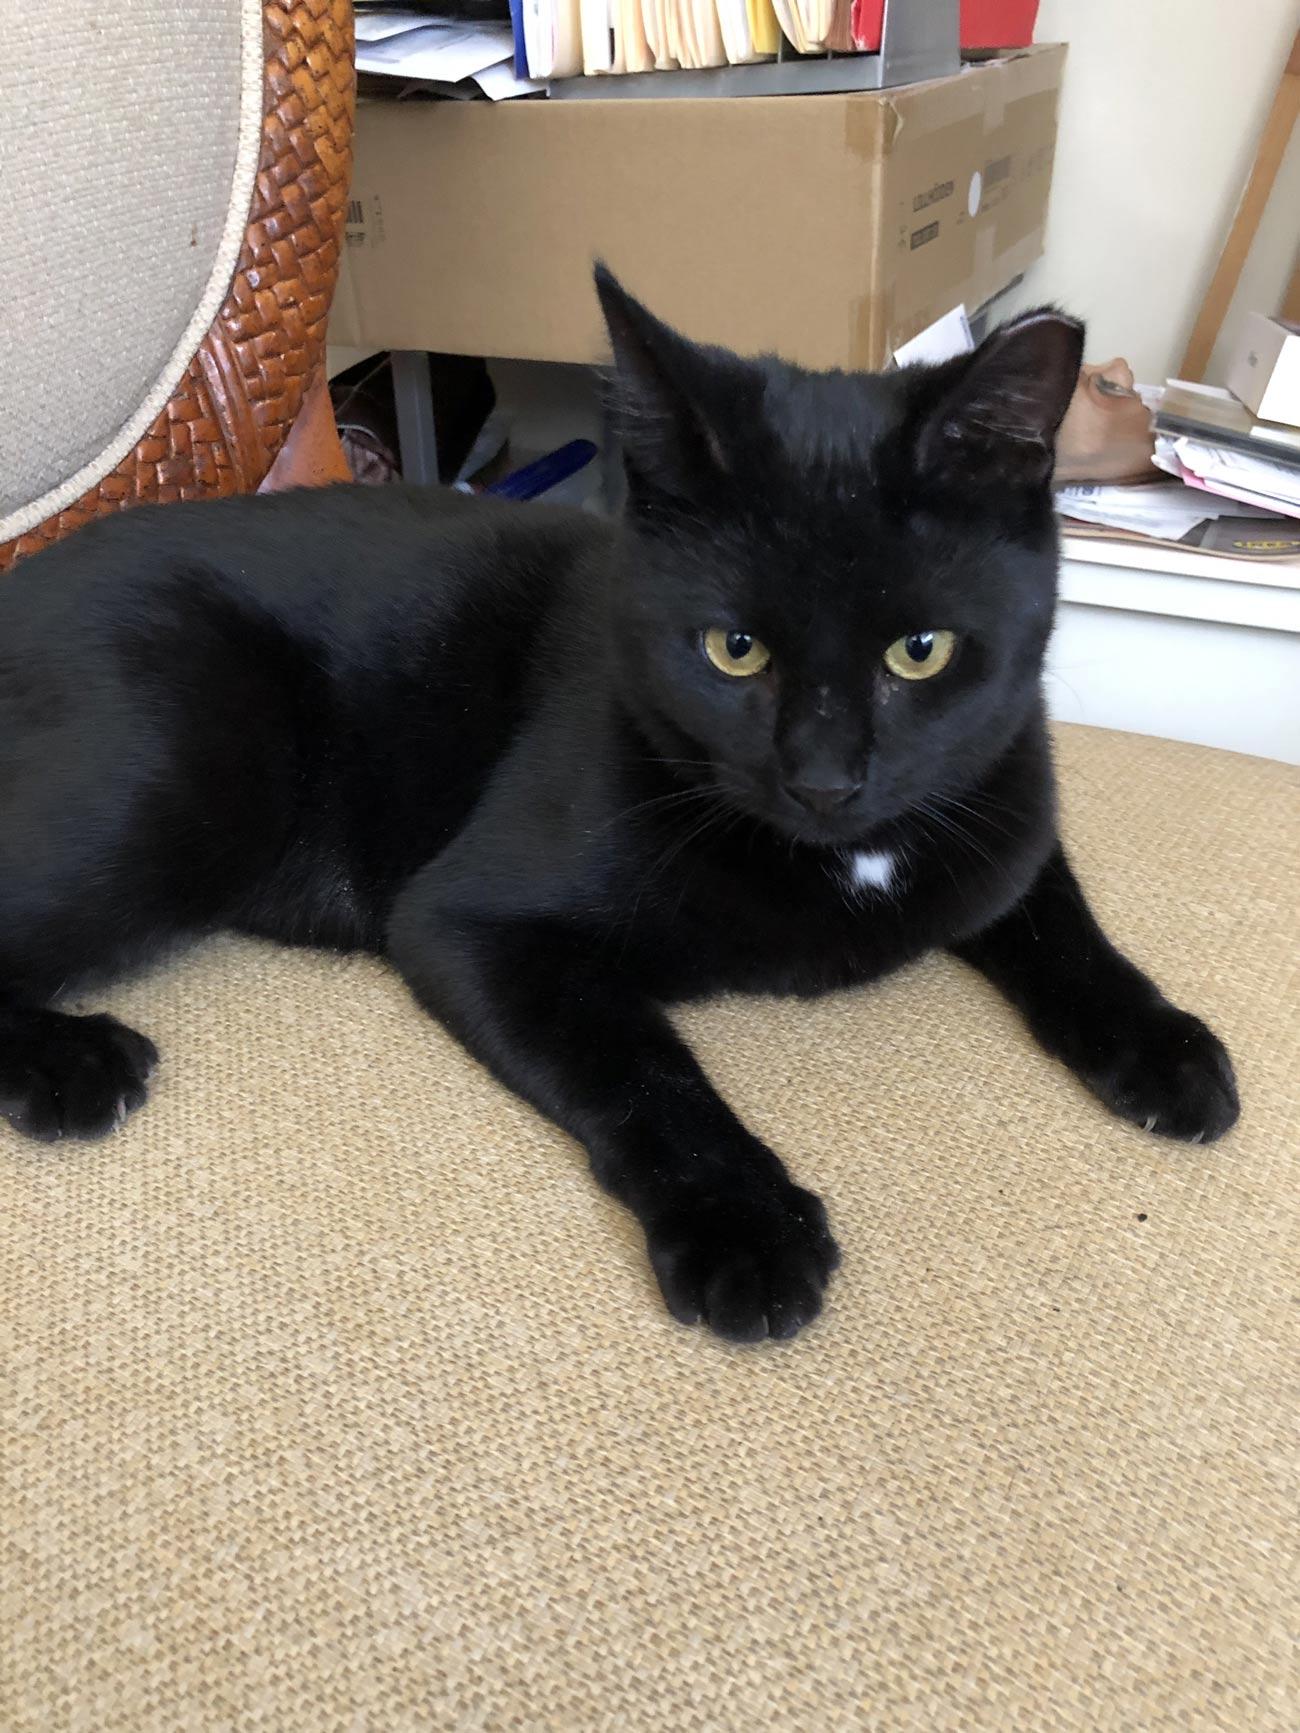 Thomas M. sent in a photo of his rescued cat Aries. She has beautiful eyes and, although her coat is black, there's a small patch of white on her chest. As the first sign in the zodiac, the presence of Aries always marks the beginning of something energetic and turbulent. 